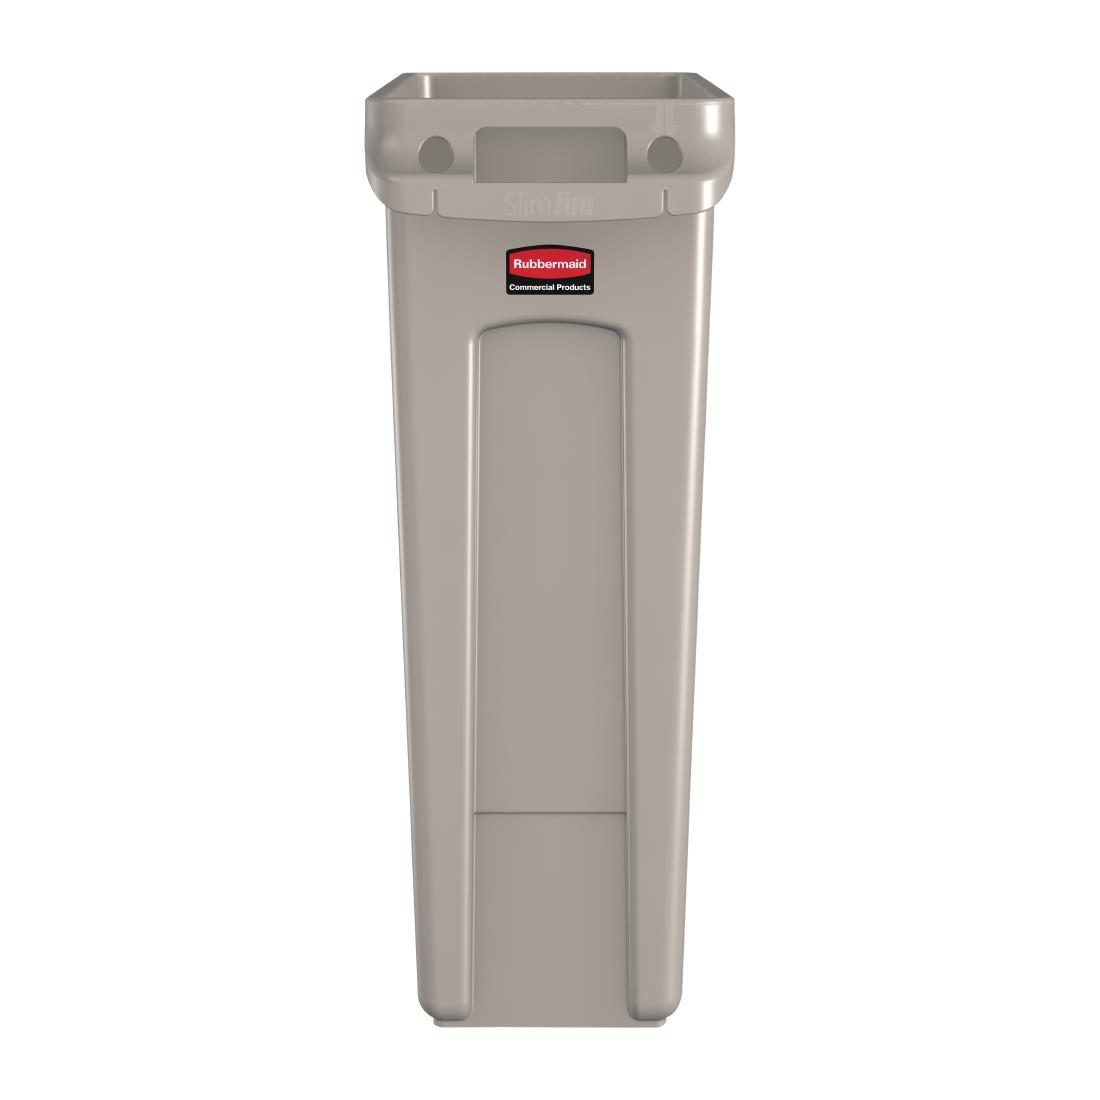 Rubbermaid Slim Jim Container With Venting Channels Beige 87Ltr - DY111  - 2